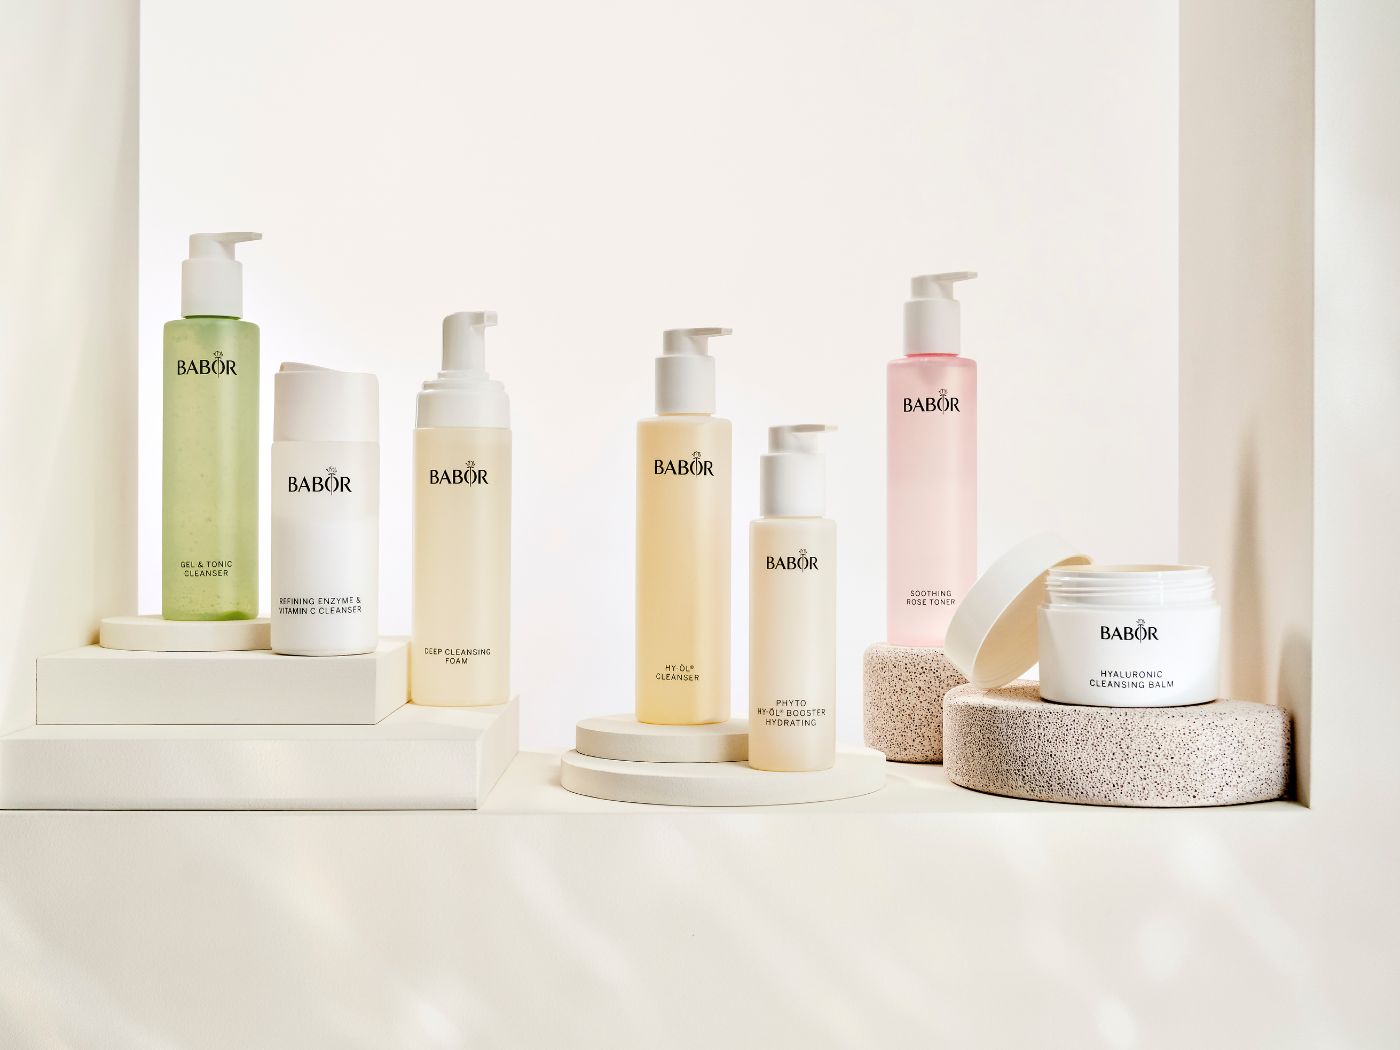 Babor launches new Vienna beauty spa